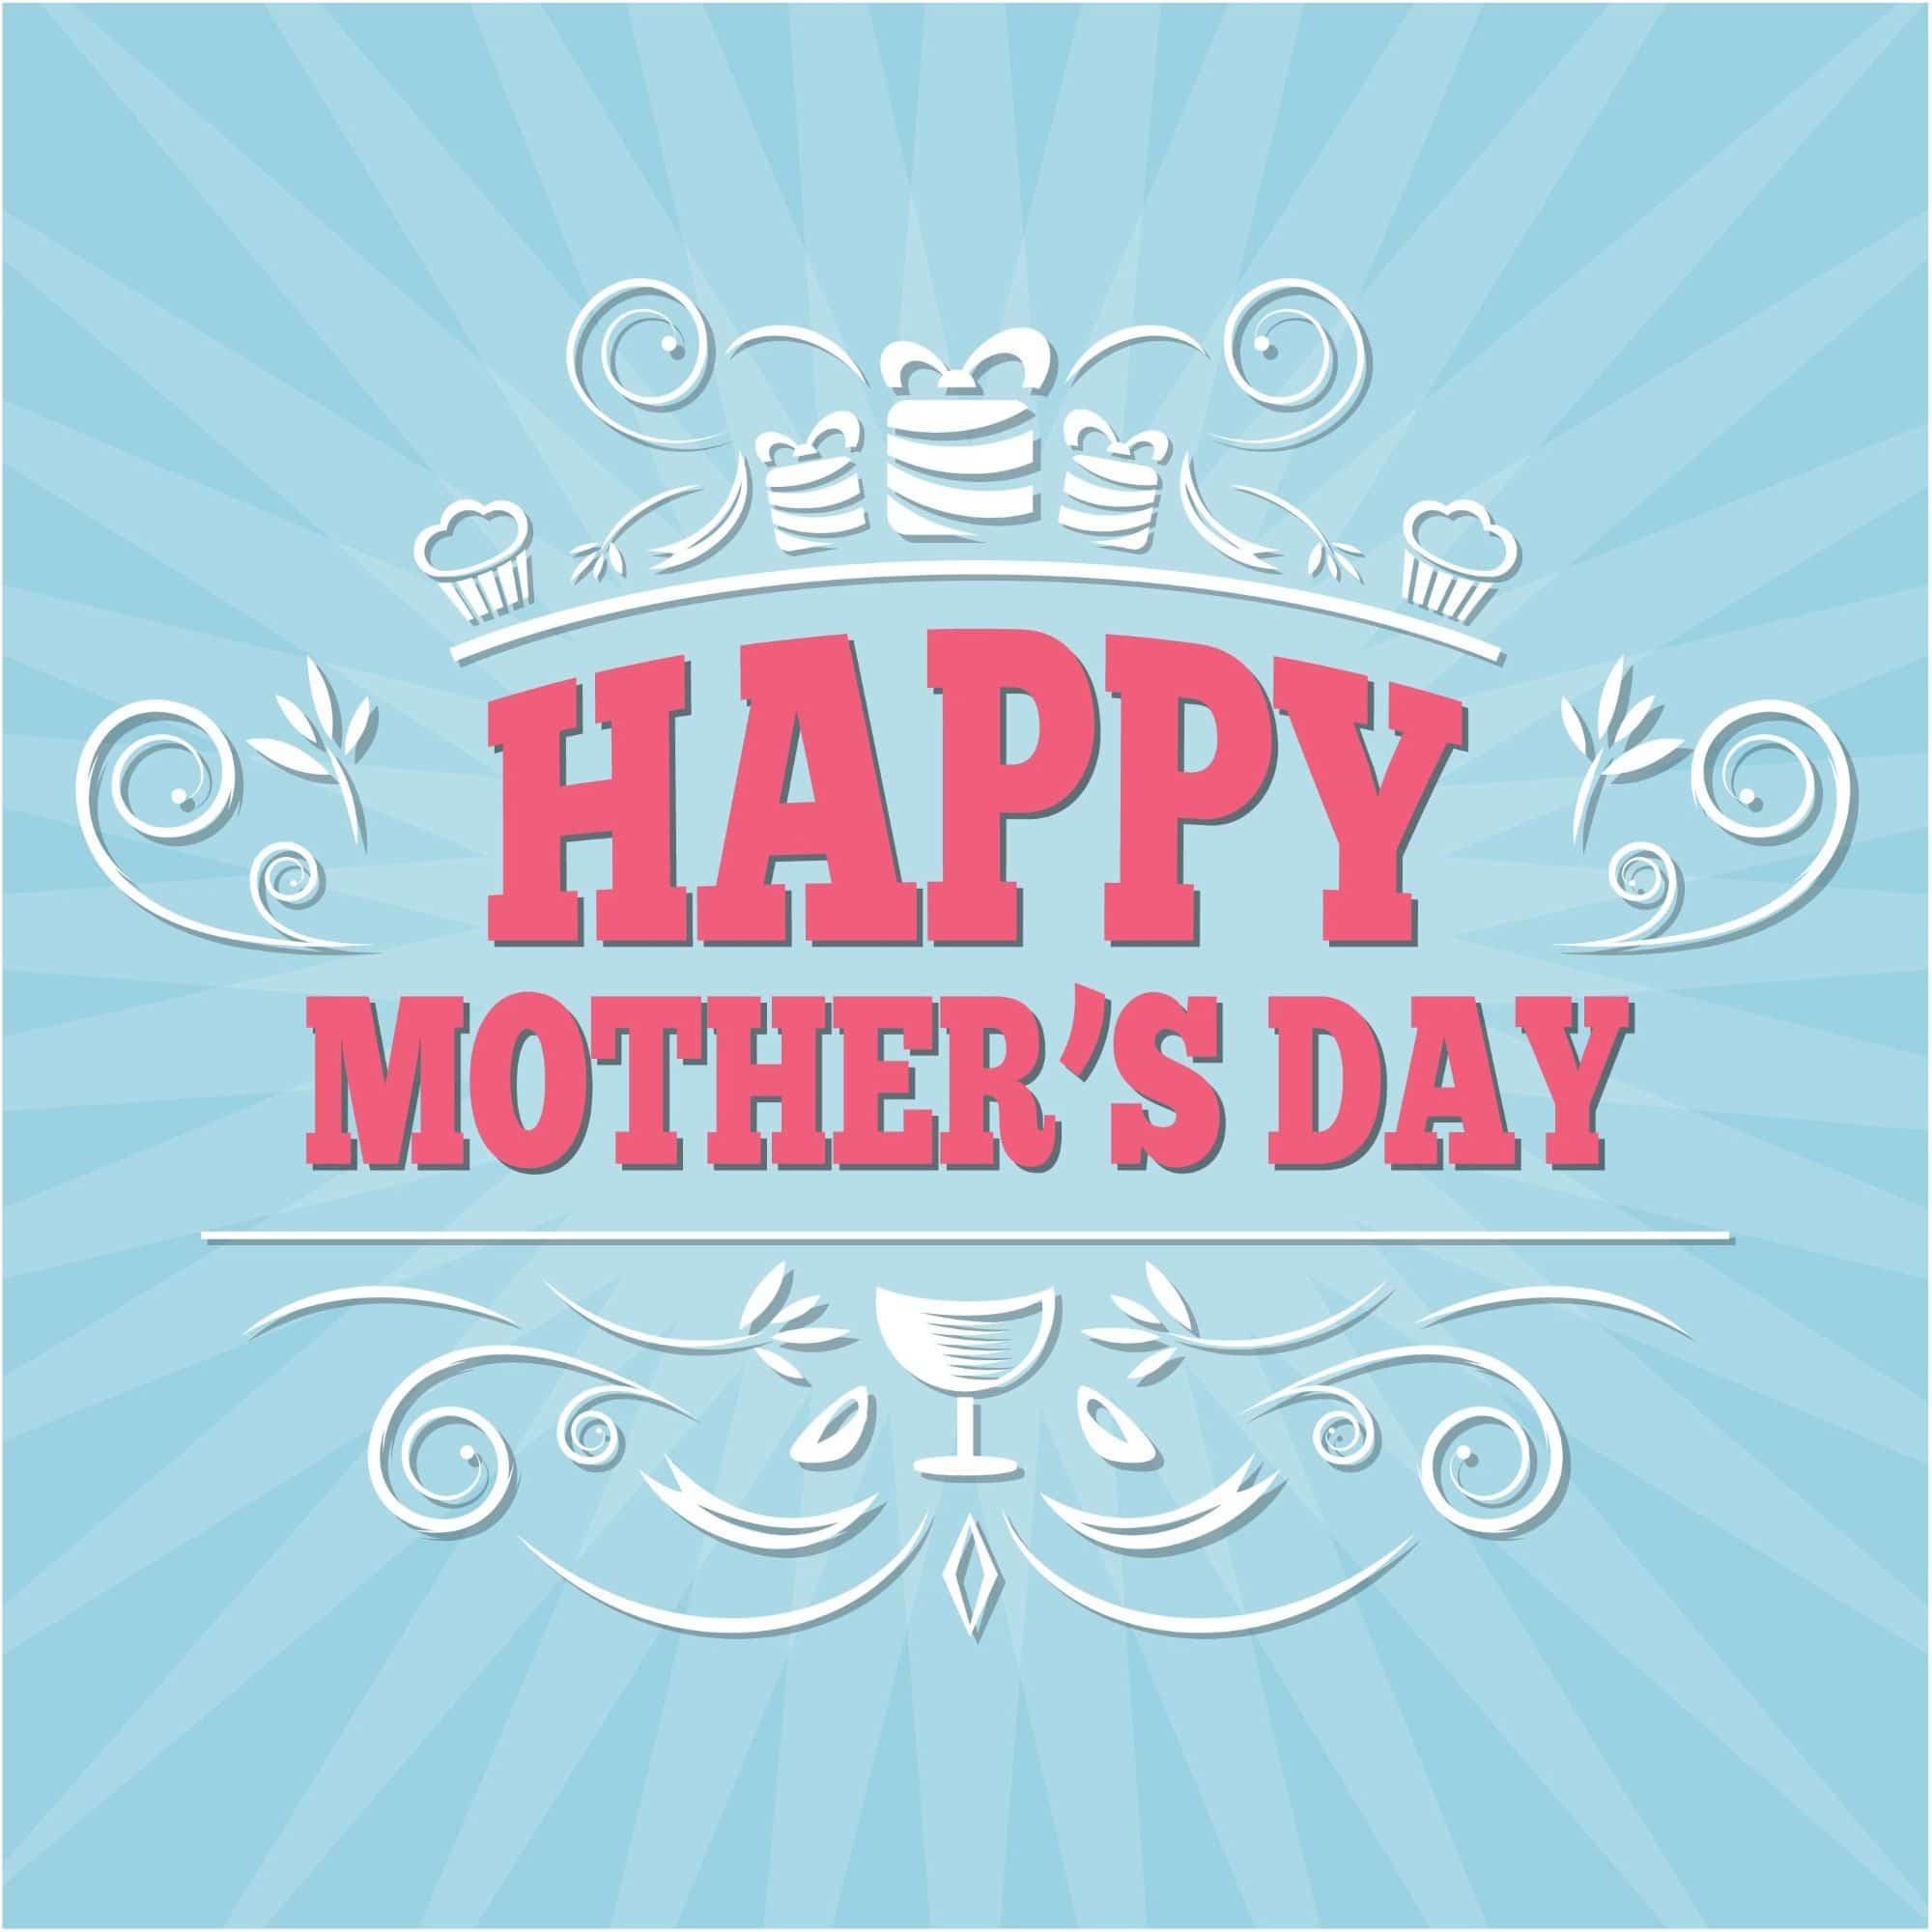 Mother's Day Vector